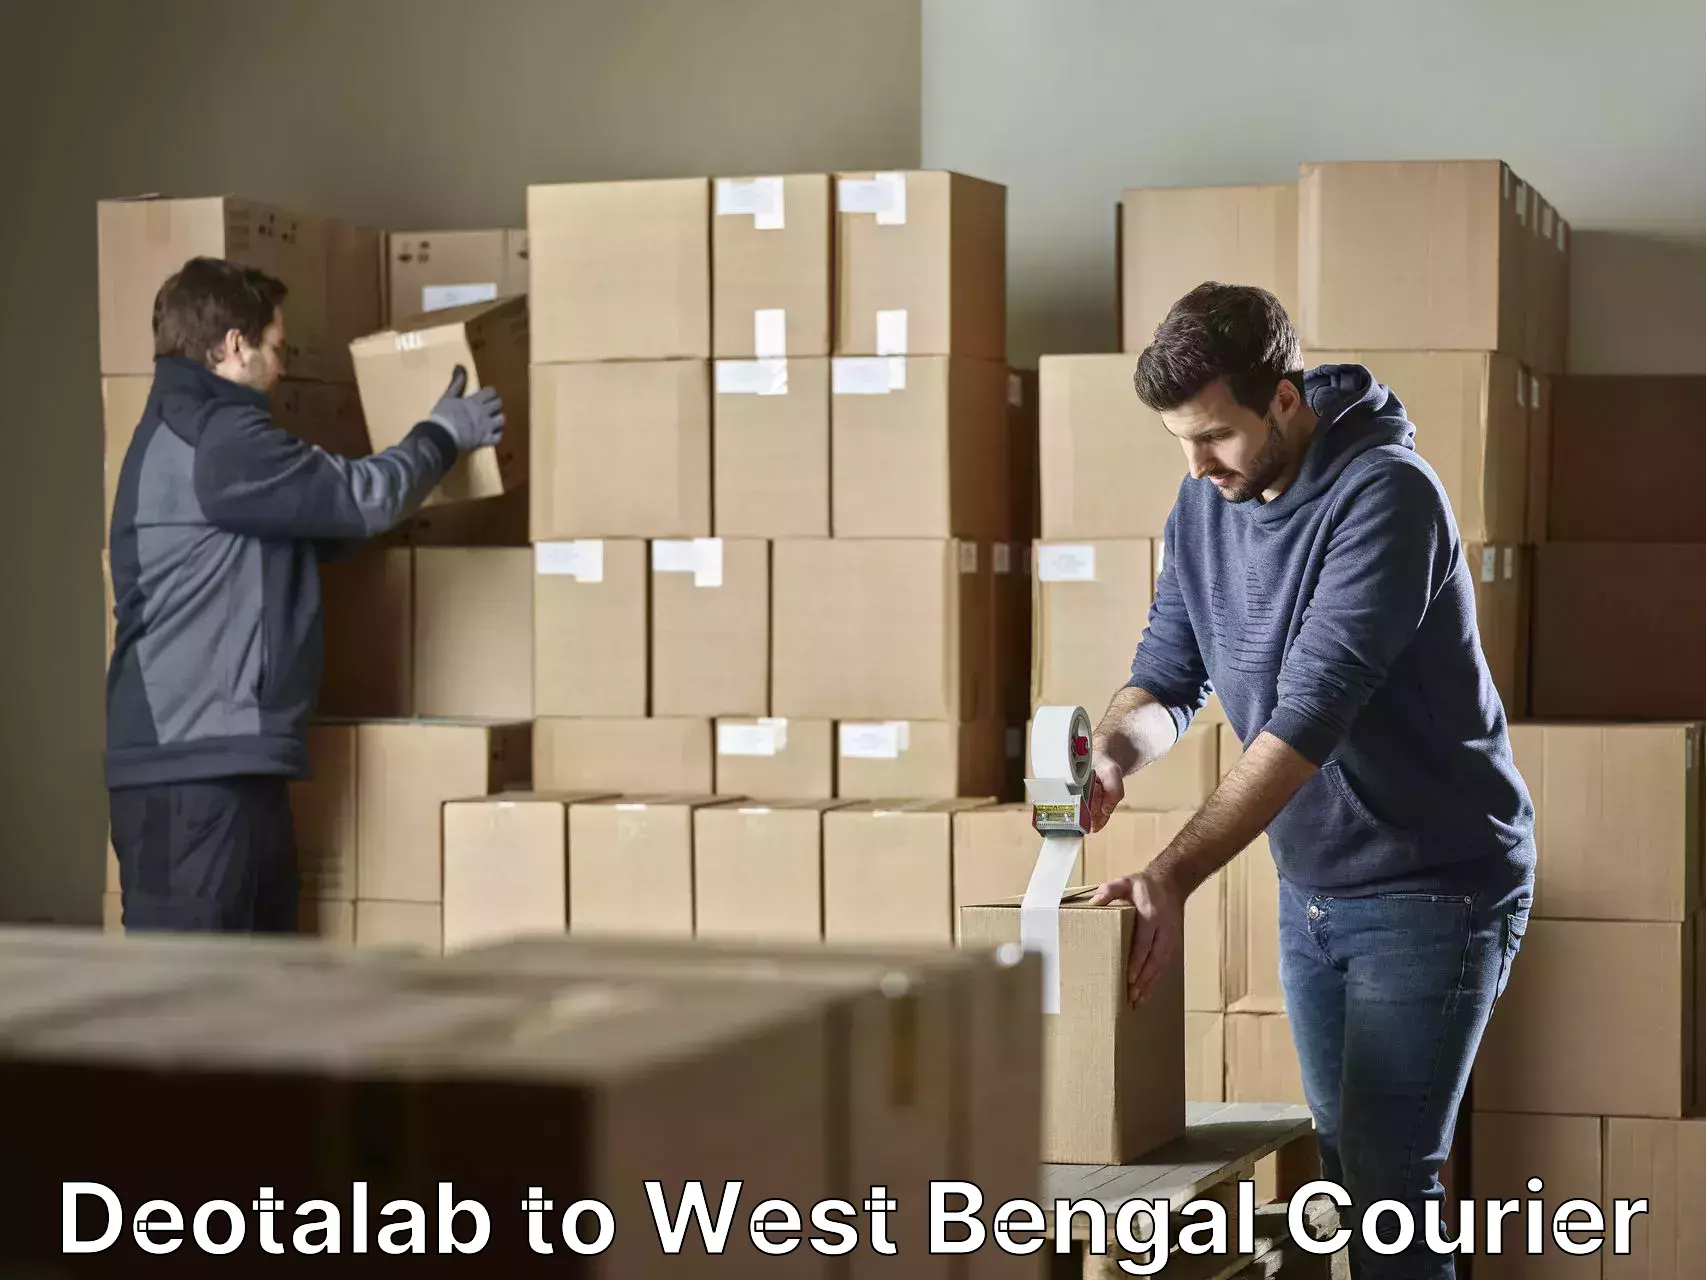 Trusted moving company Deotalab to West Bengal